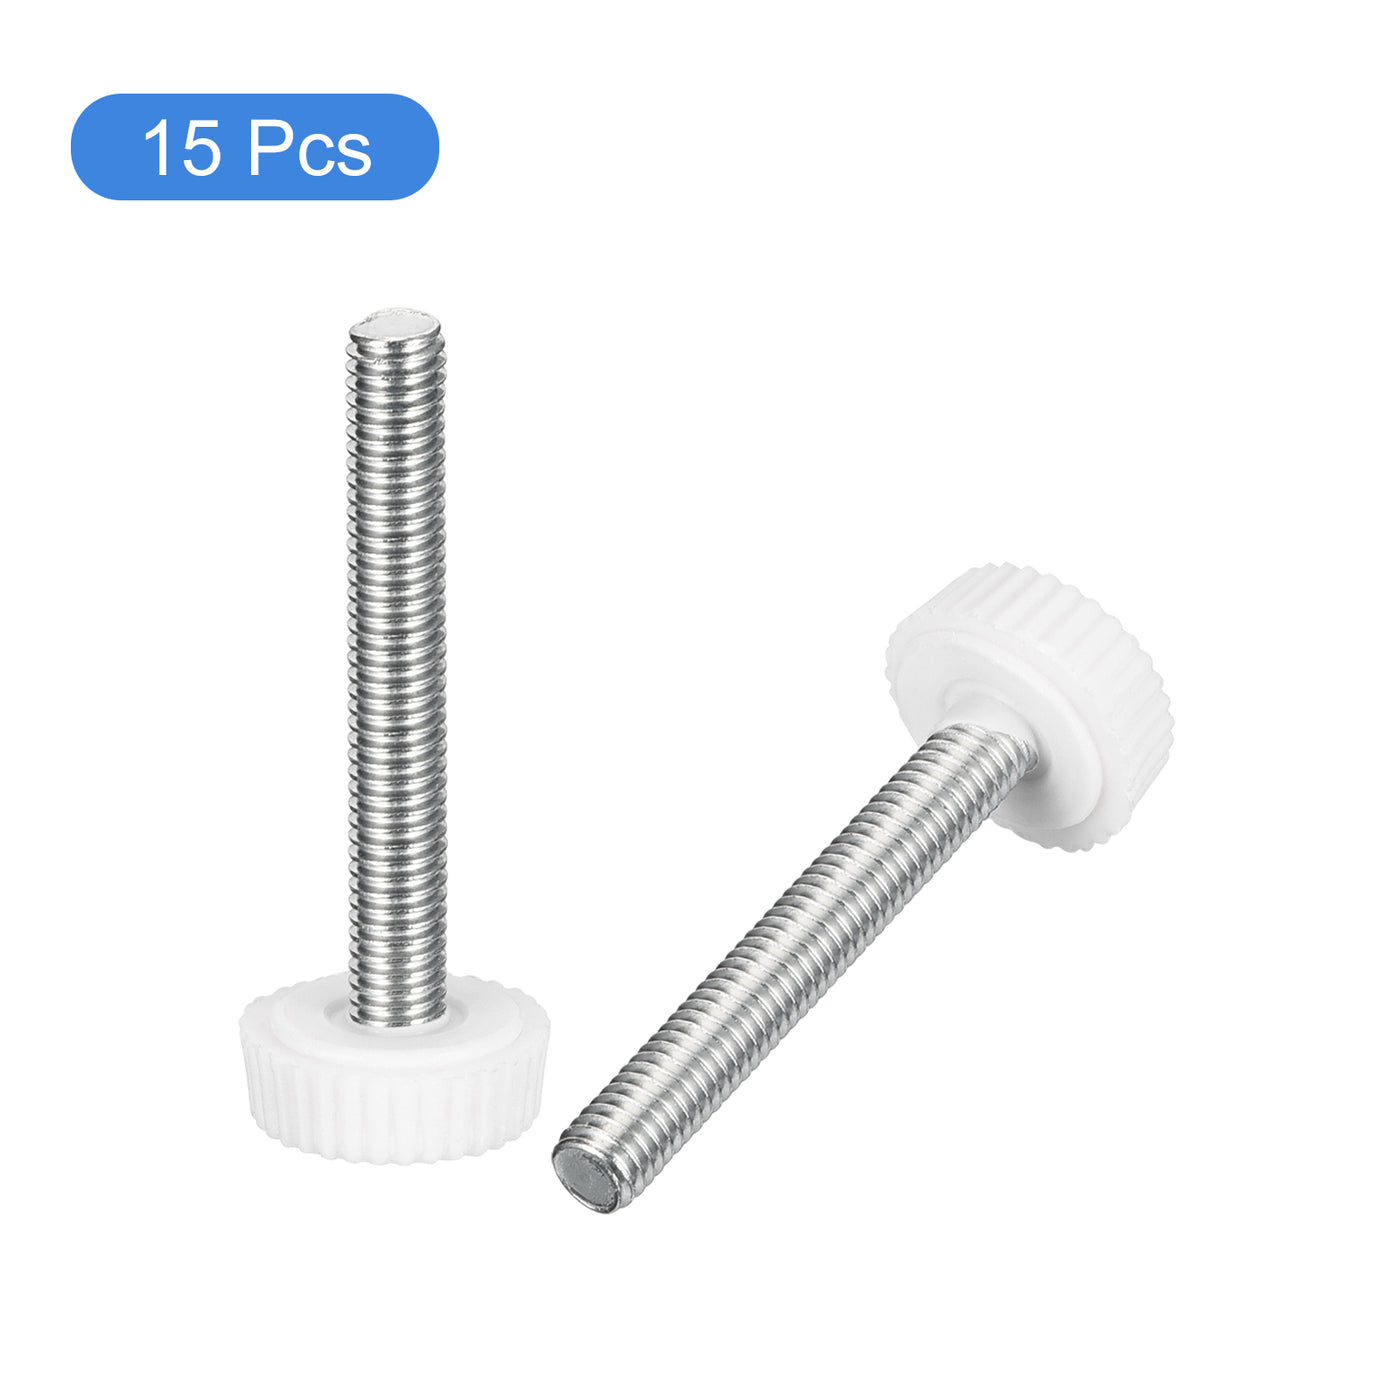 uxcell Uxcell 15Pcs M5x35mm Threaded Knurled Thumb Screws, Zinc Plated Carbon Steel White